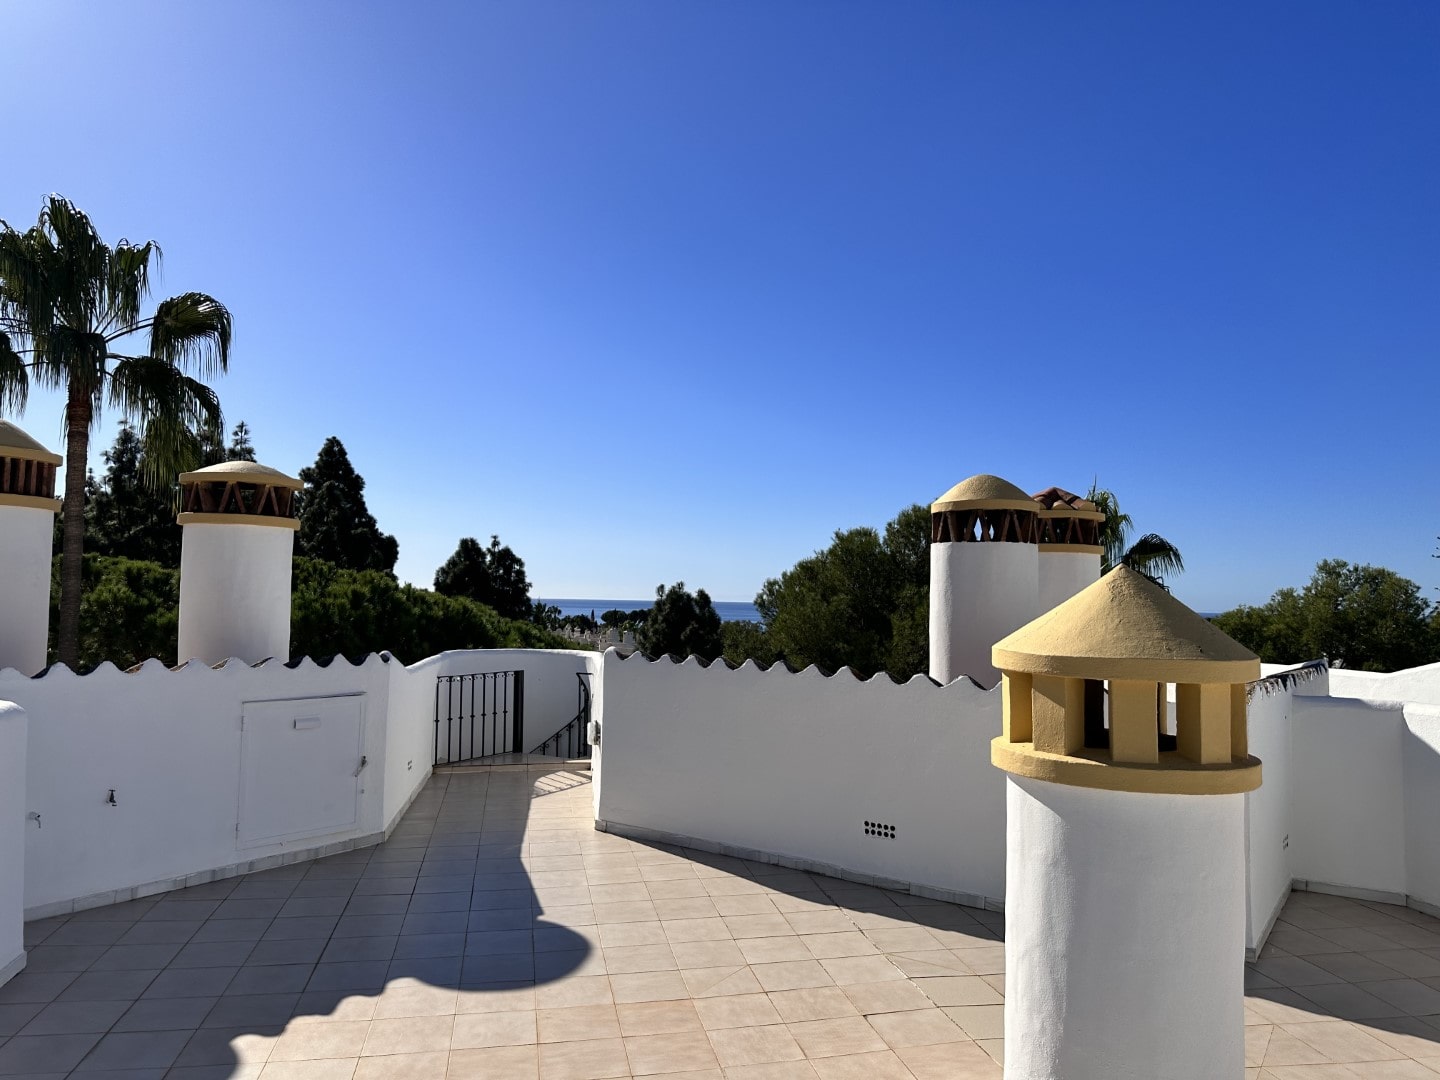 Penthouse with private roof terrace surrounded by the Calahonda golf course